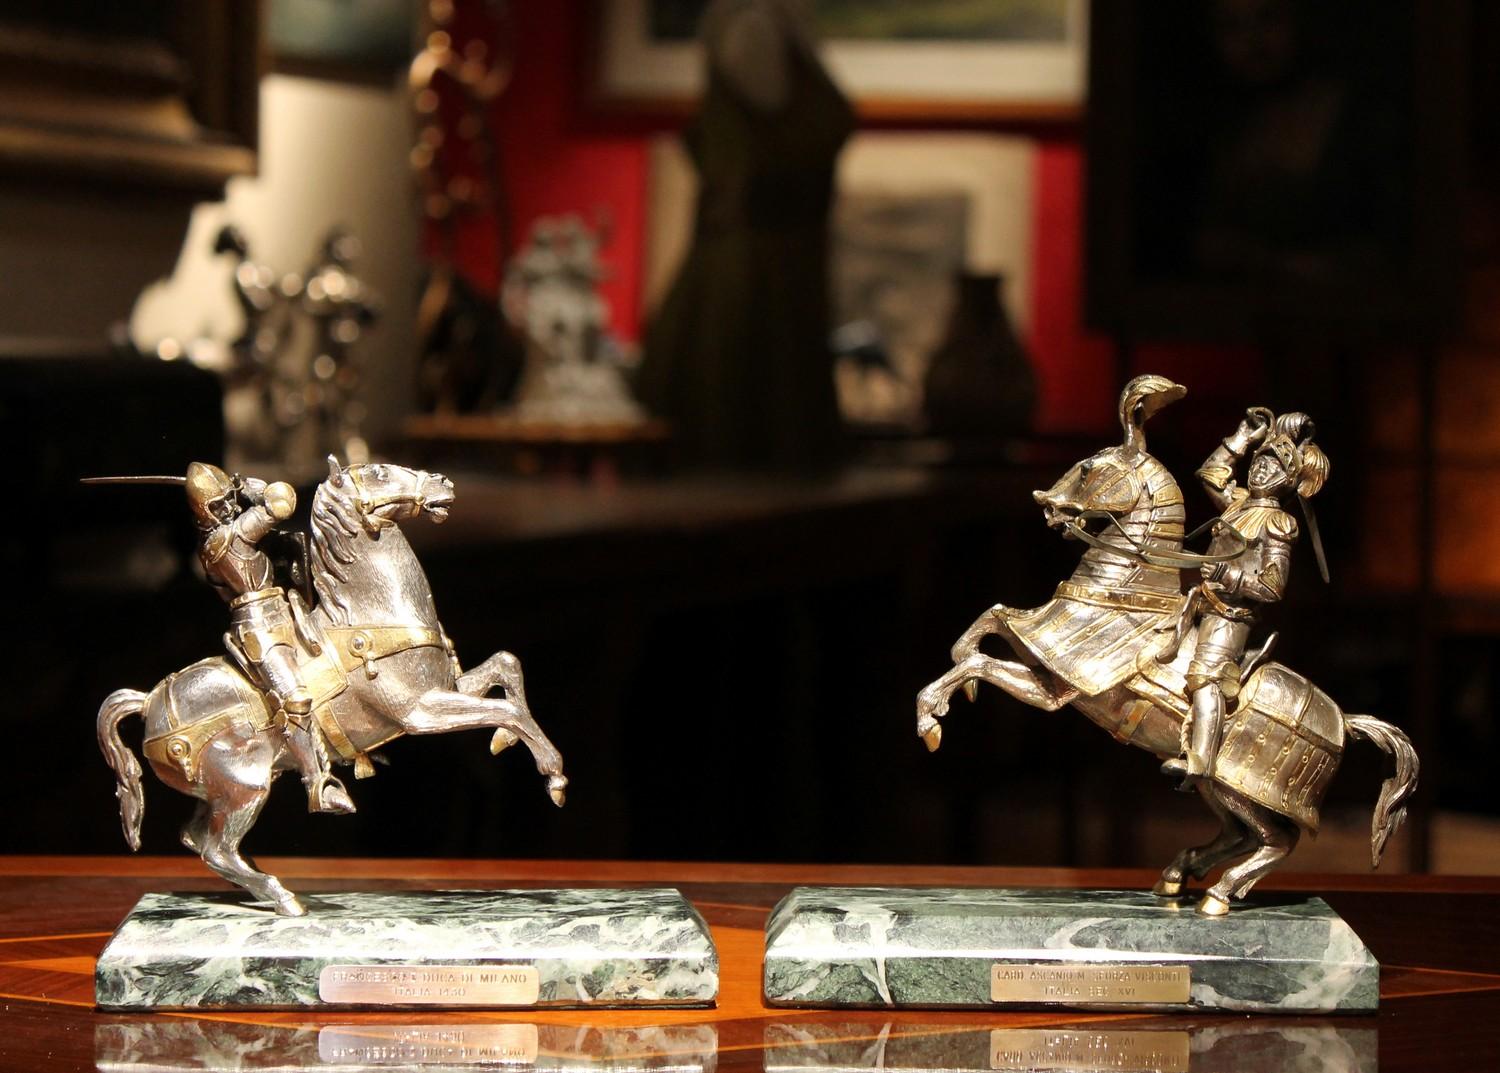 These Italian casting silver 800 and vermeil striking equestrian figural statuettes have a definite classical appeal, thanks to the exquisite depiction of rampant horses supporting fighting knights dressed in full medieval military gear, including